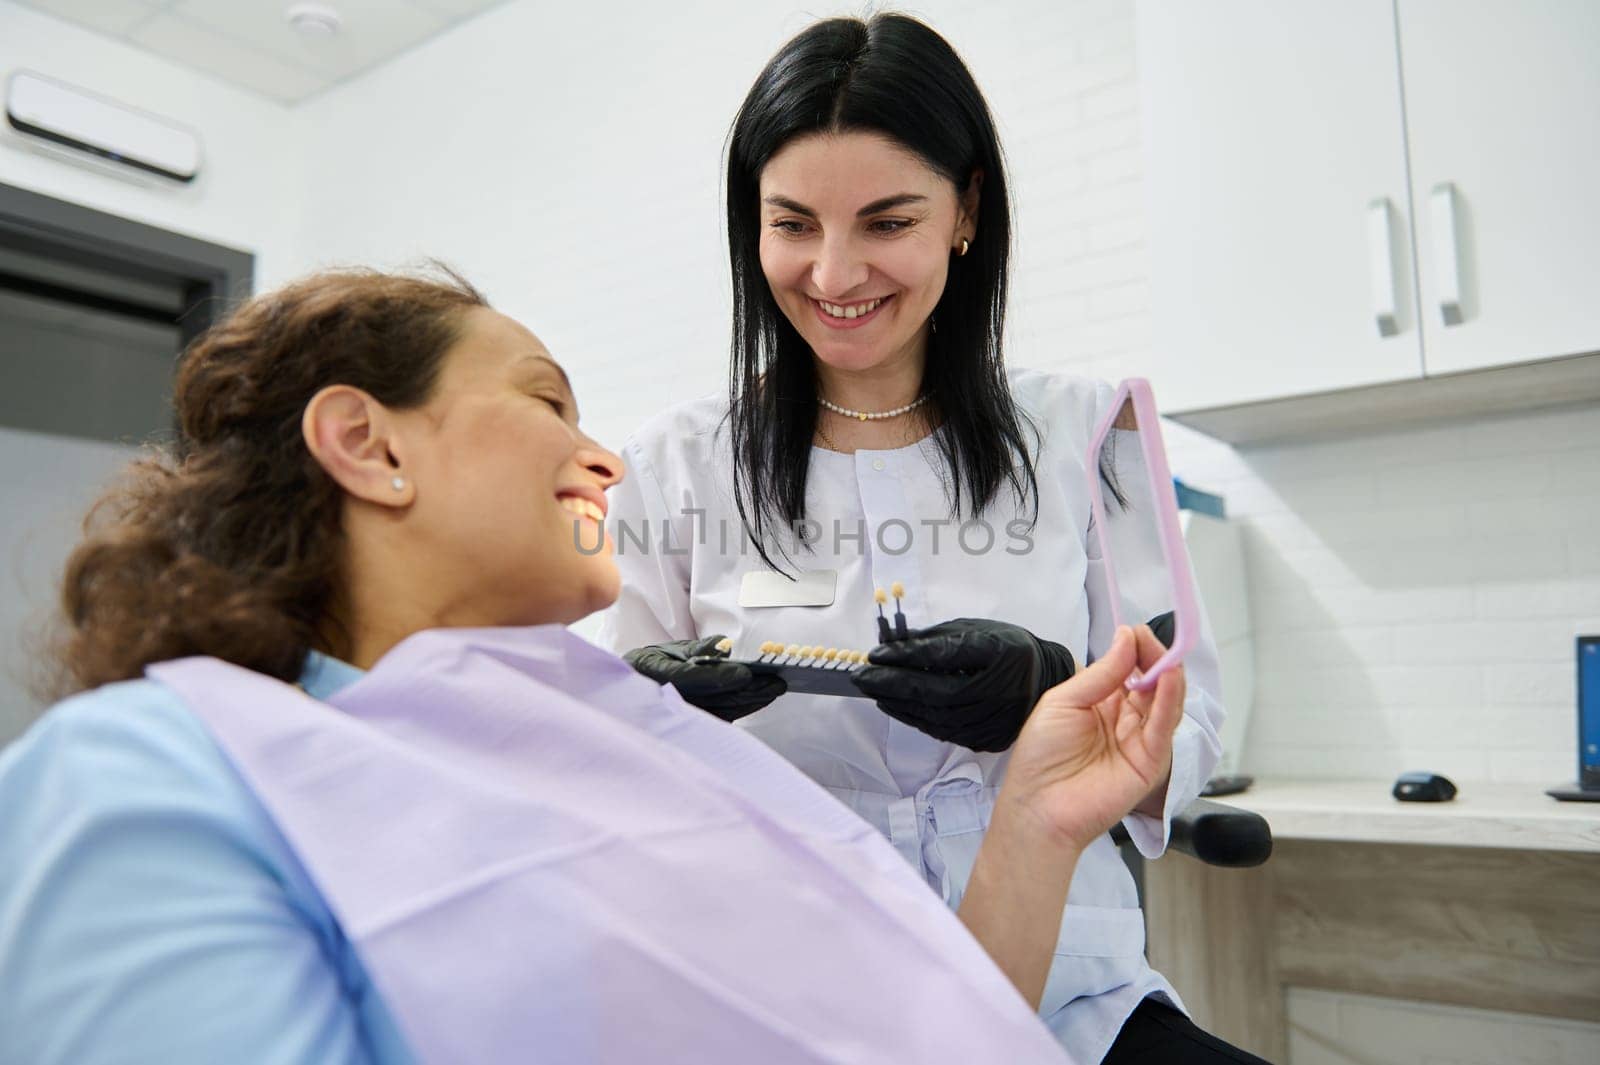 Smiling happy woman looking at her mirror reflection after teeth whitening procedure in dentistry clinic by artgf